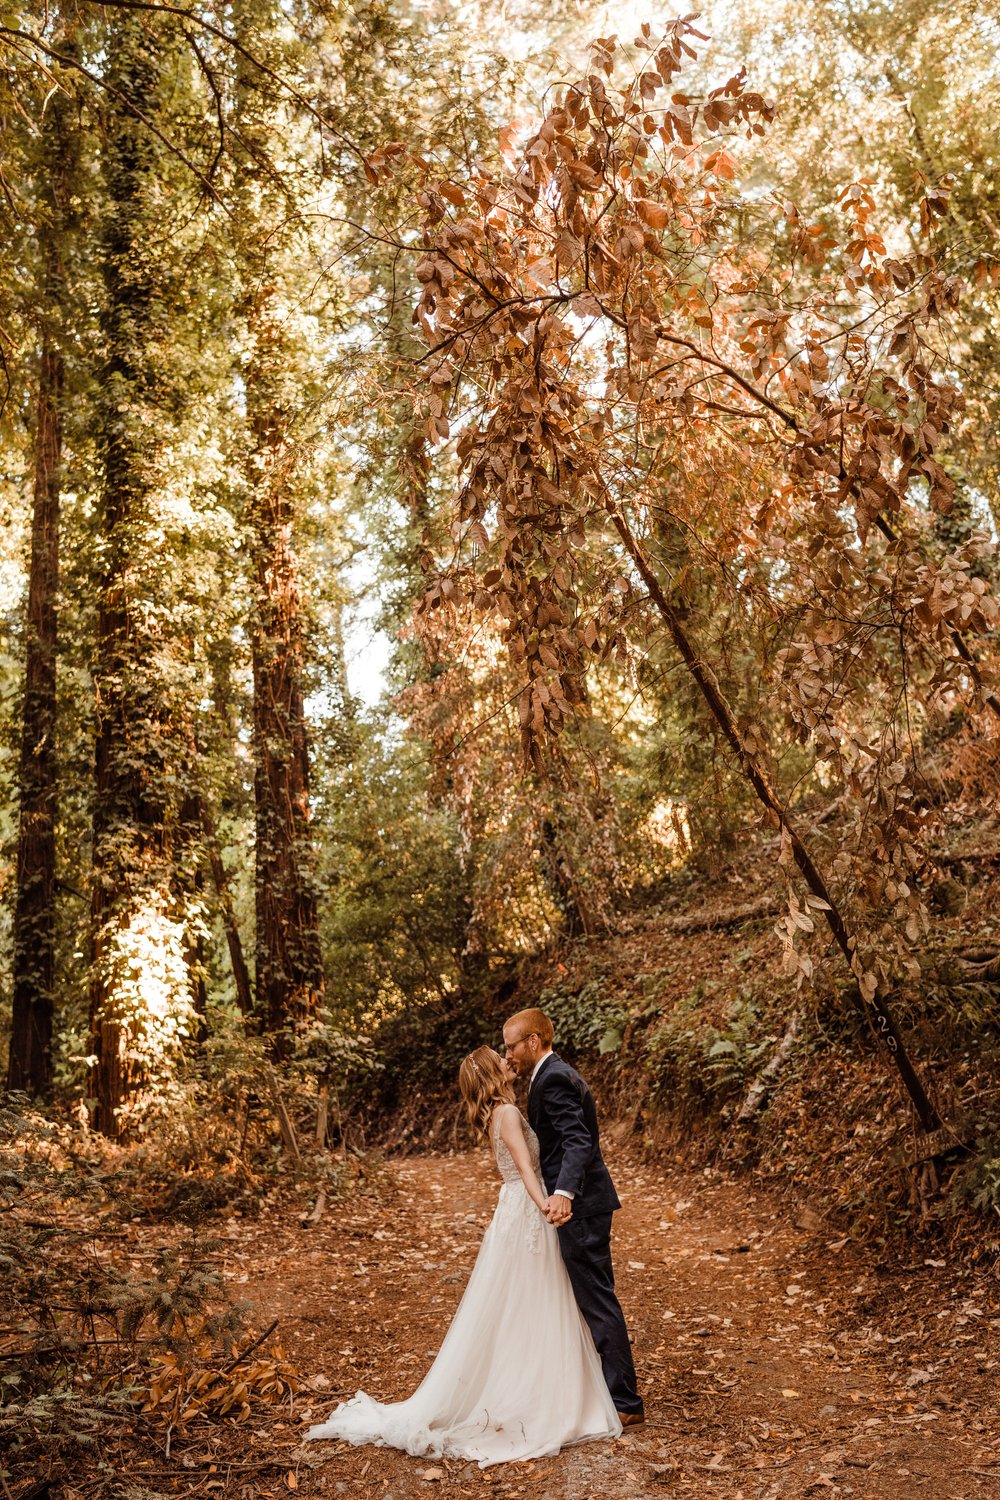 Wedding-in-the-Woods-Bride-and-Groom-Sunlit-Pictures-Beneath-Redwood-Forest (18).jpg